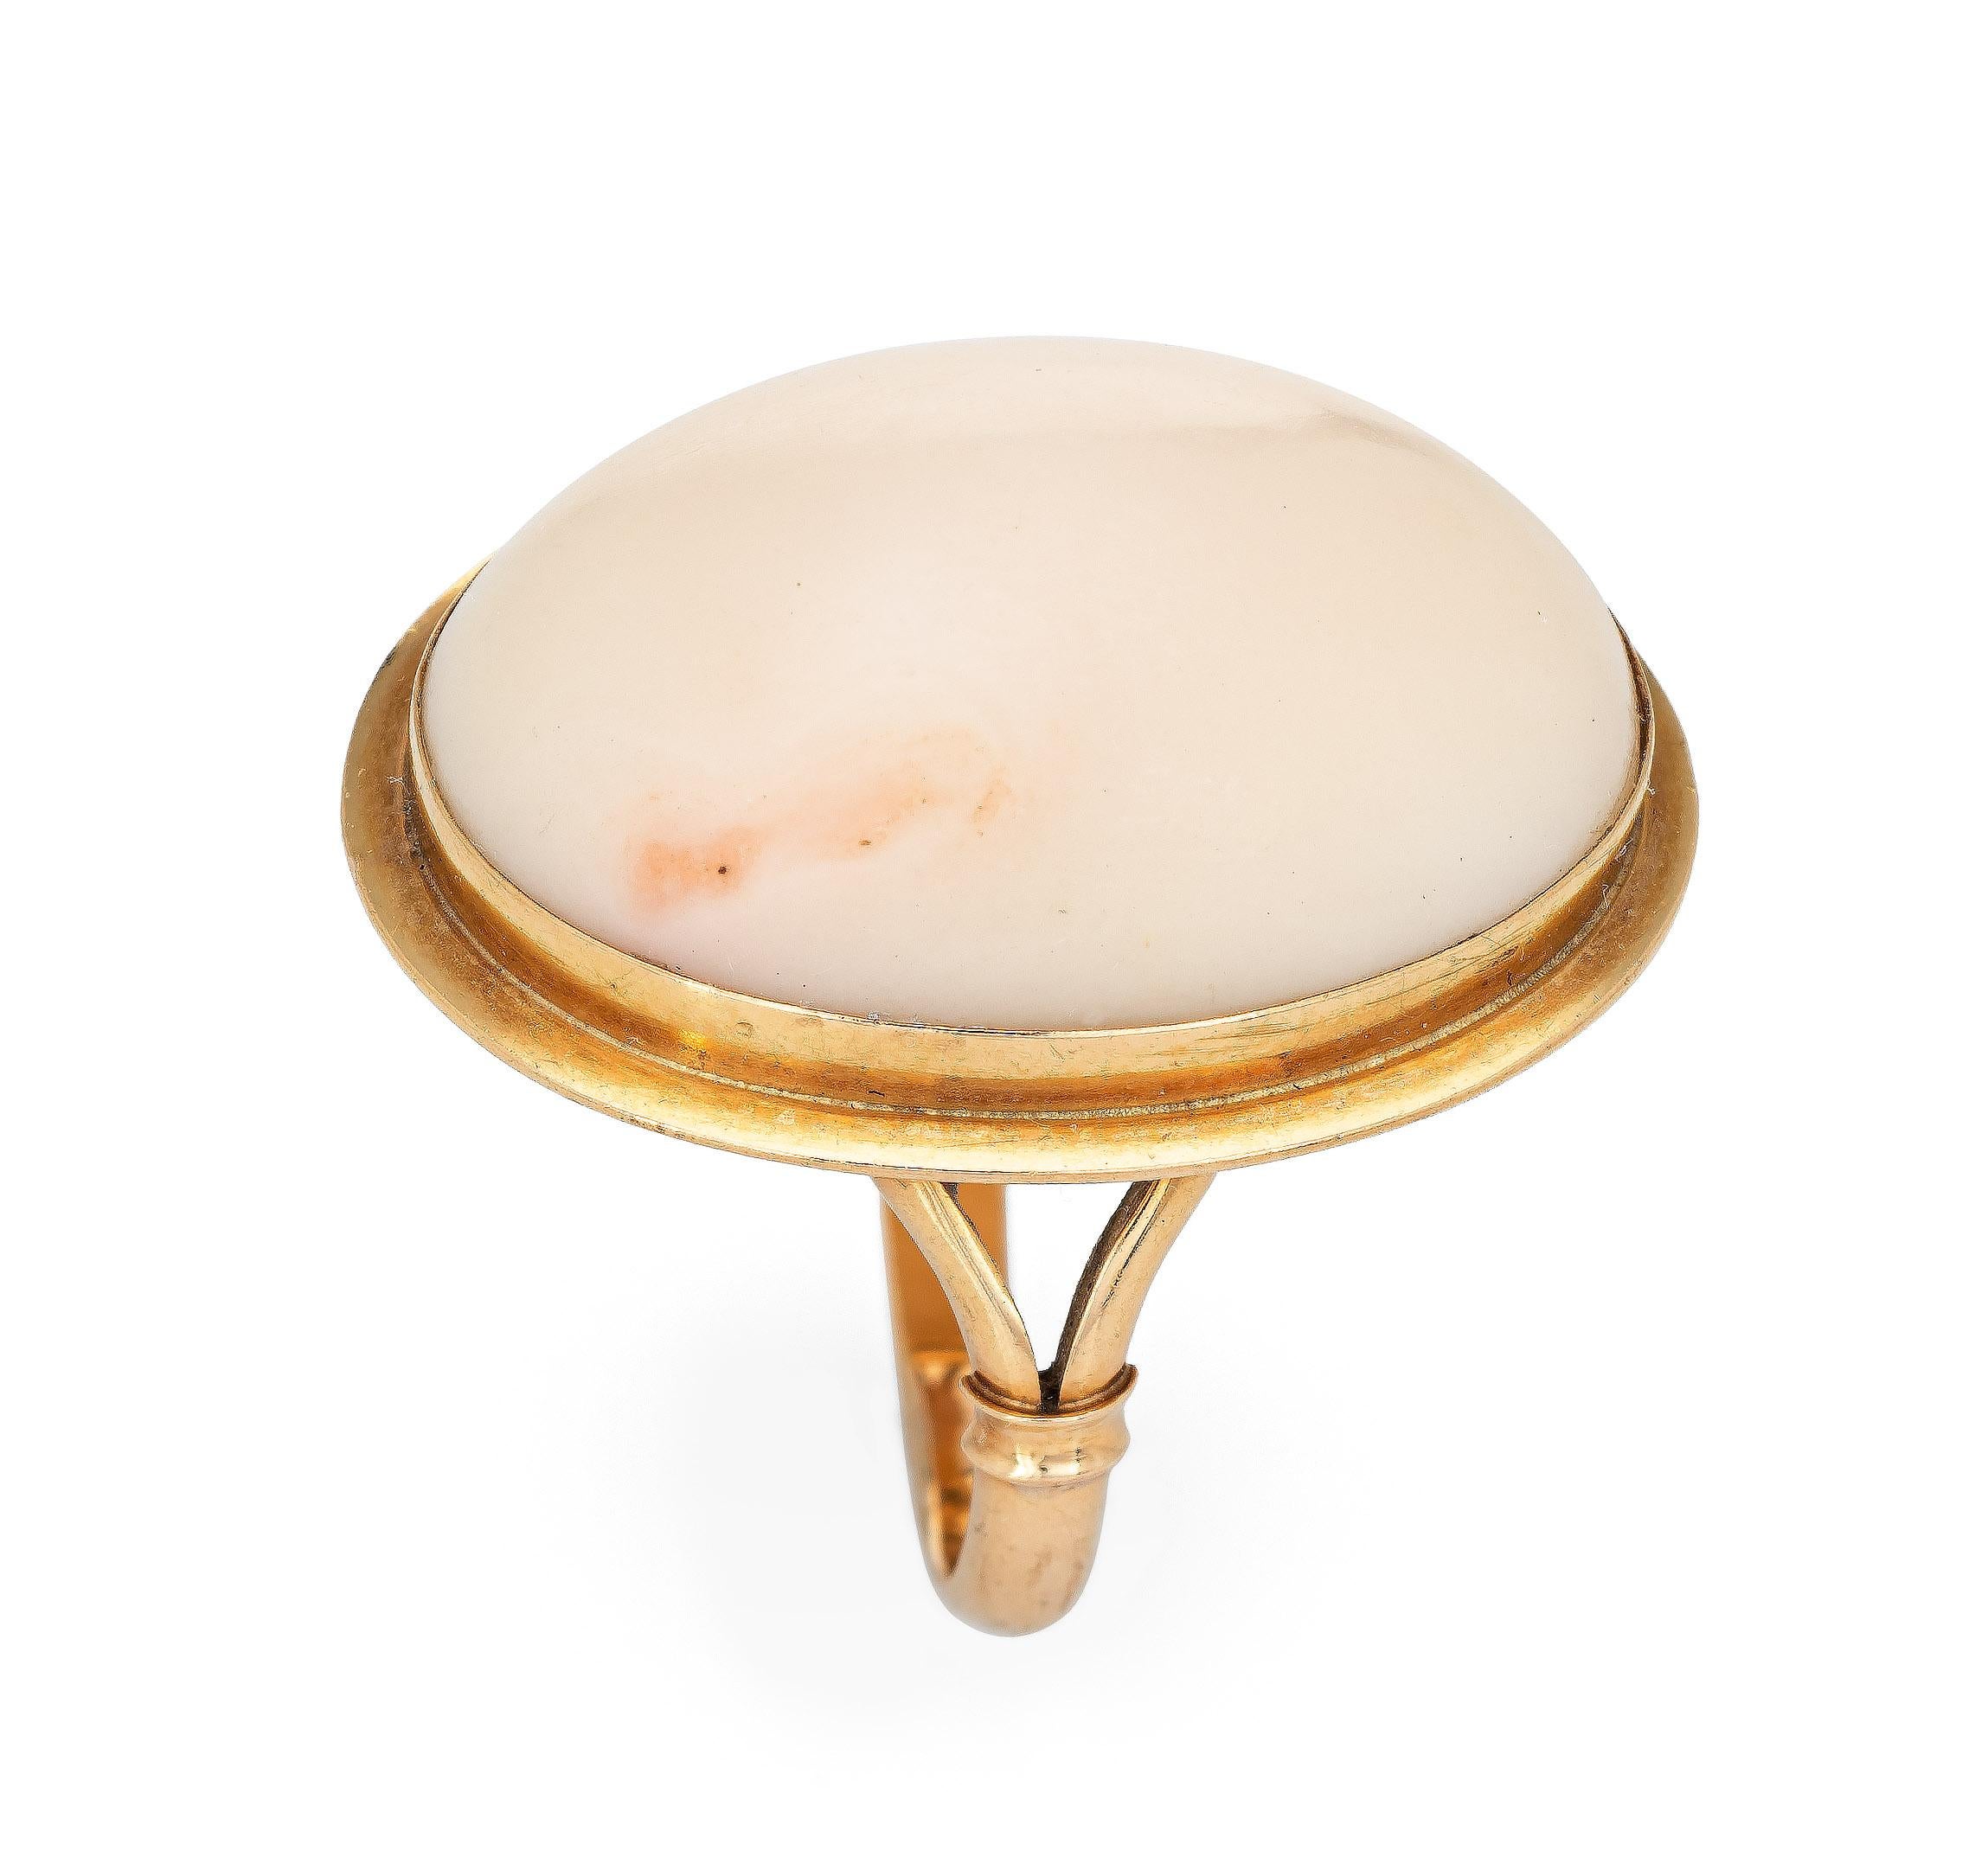 Stylish vintage angel skin coral ring (circa 1950s to 1960s) crafted in 18 karat yellow gold. 

Cabochon cut angel skin coral measures 22mm x 16mm (estimated at 16 carats). The coral is in excellent condition and free of cracks or chips. 

The light